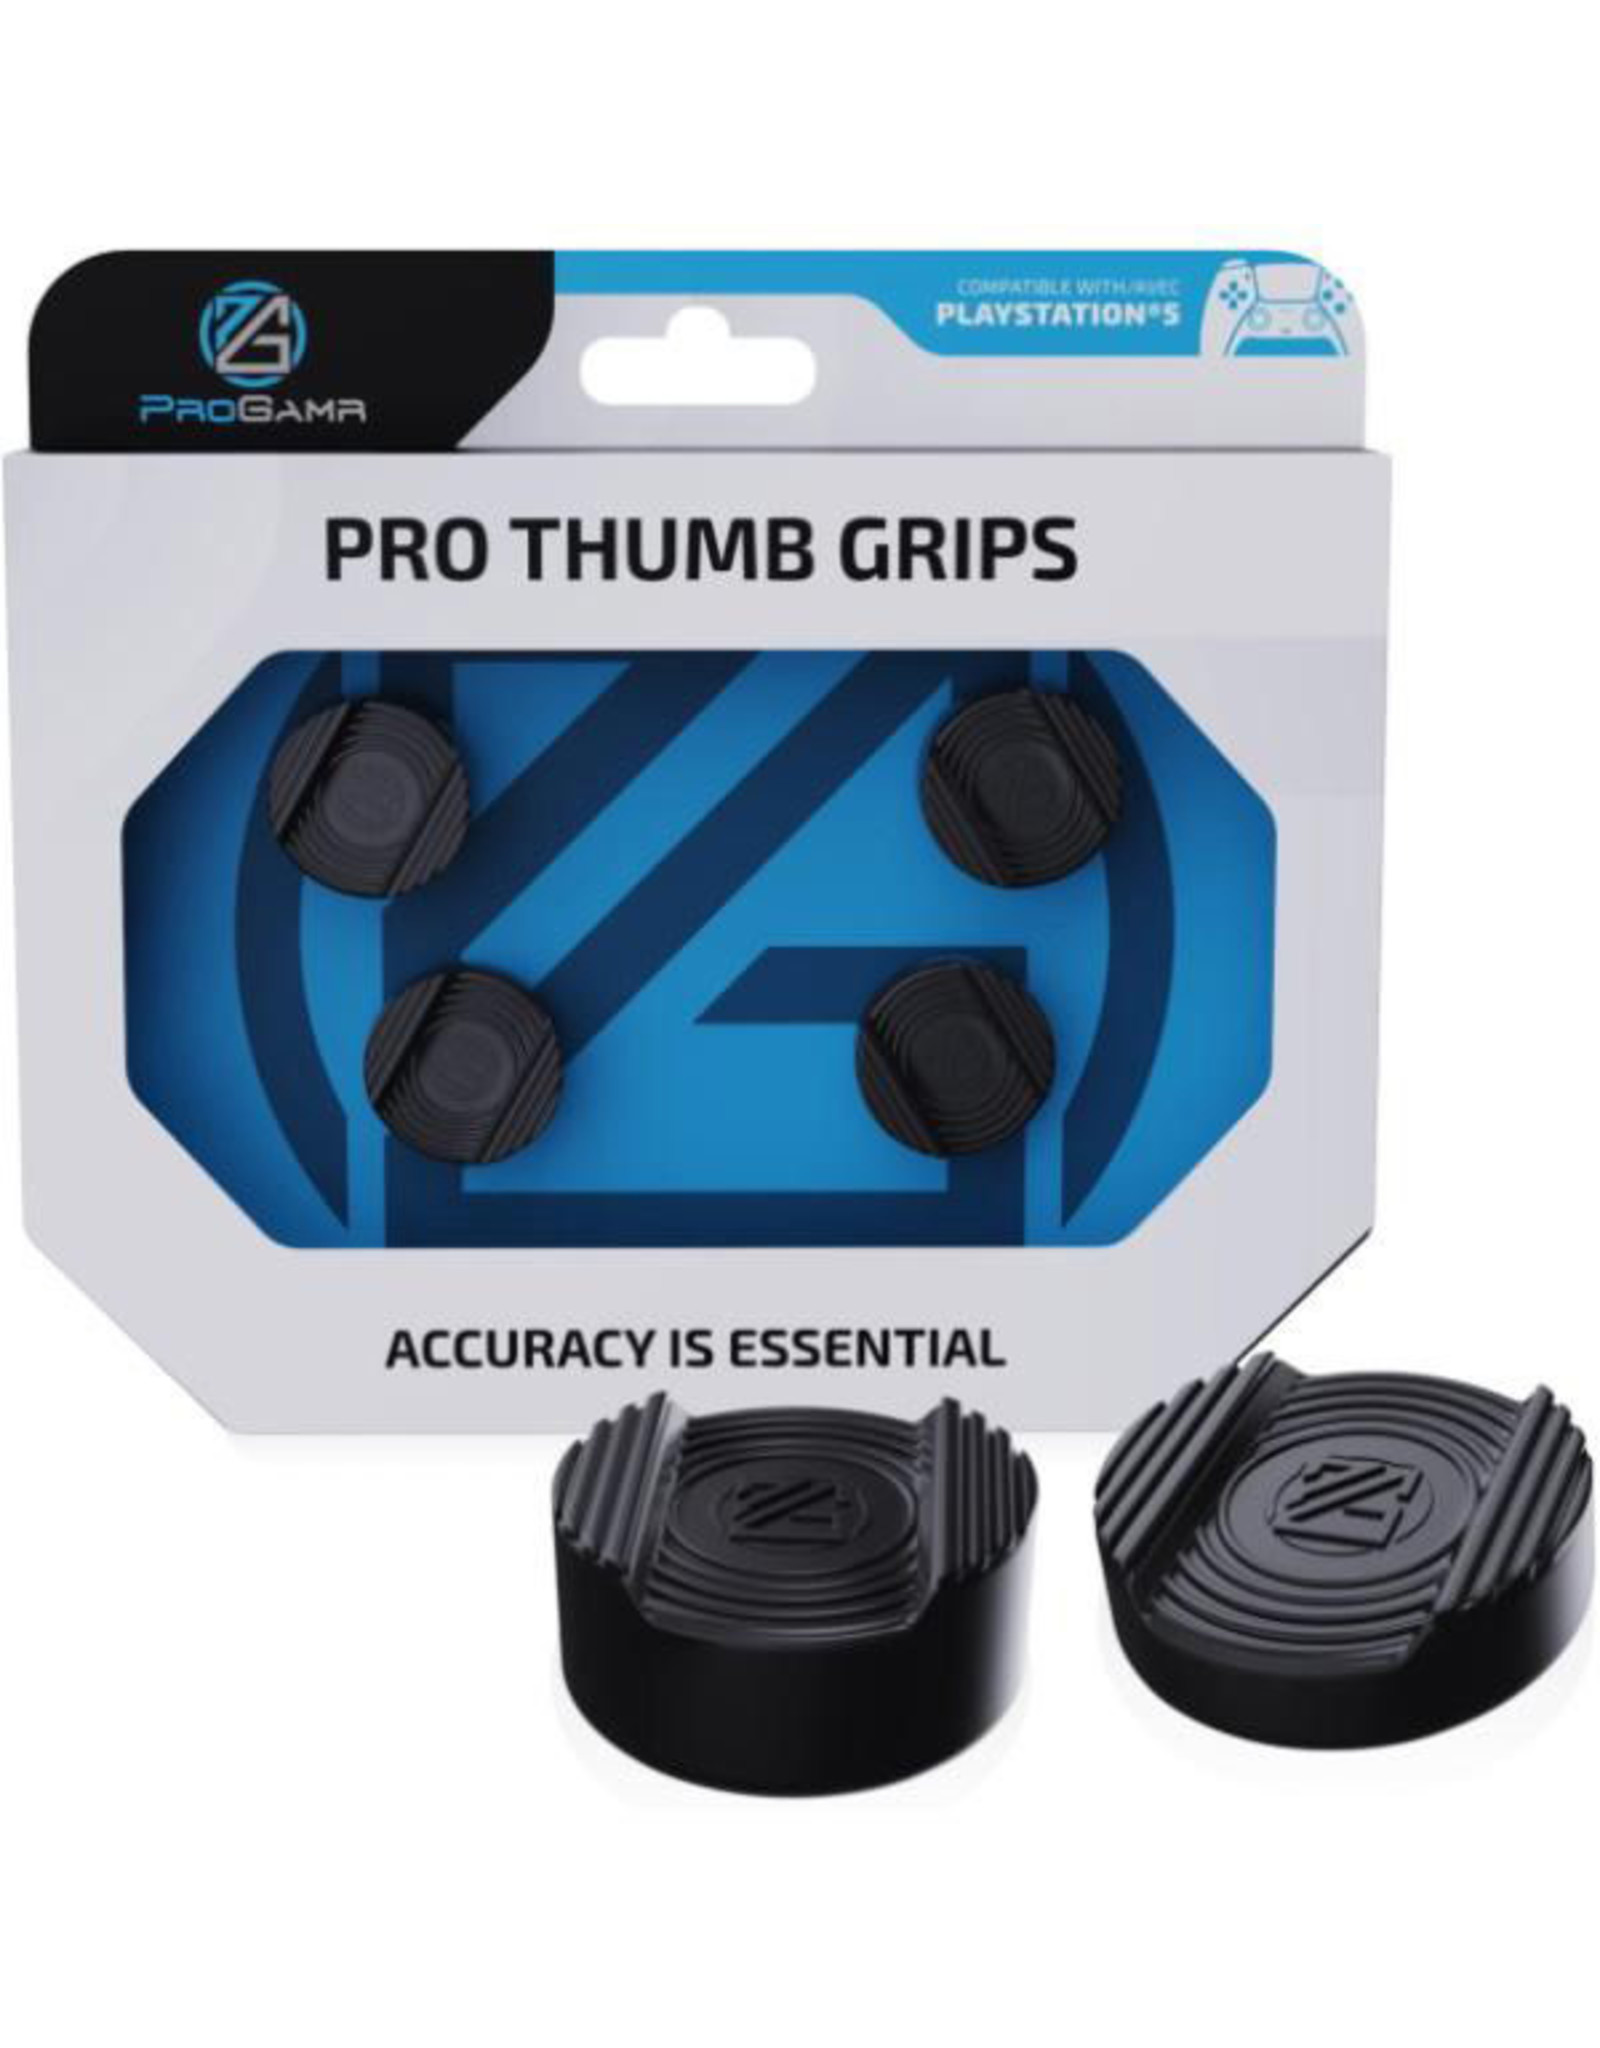 ProGAMR - Performance Pro Thumb Grips for PS5 Controller